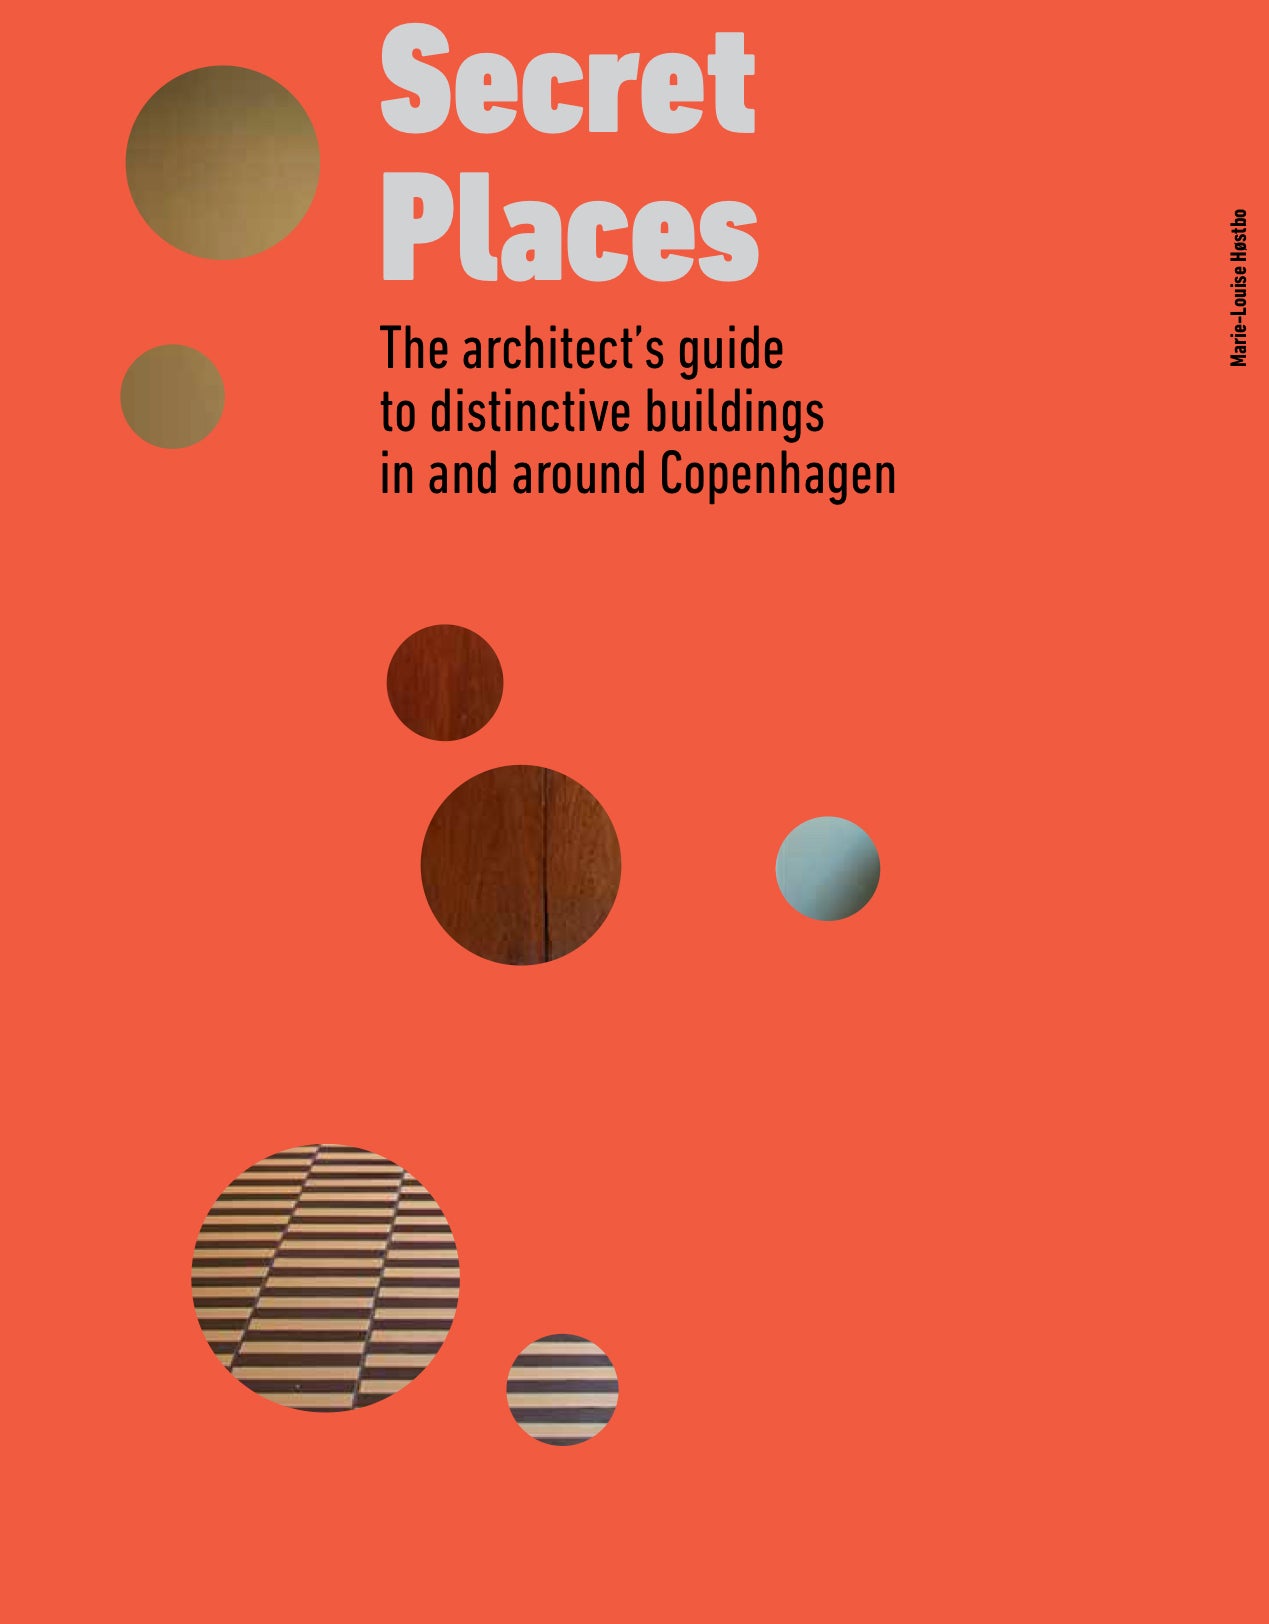 Secret Places - The architect’s guide to secret places in and around Copen­hagen